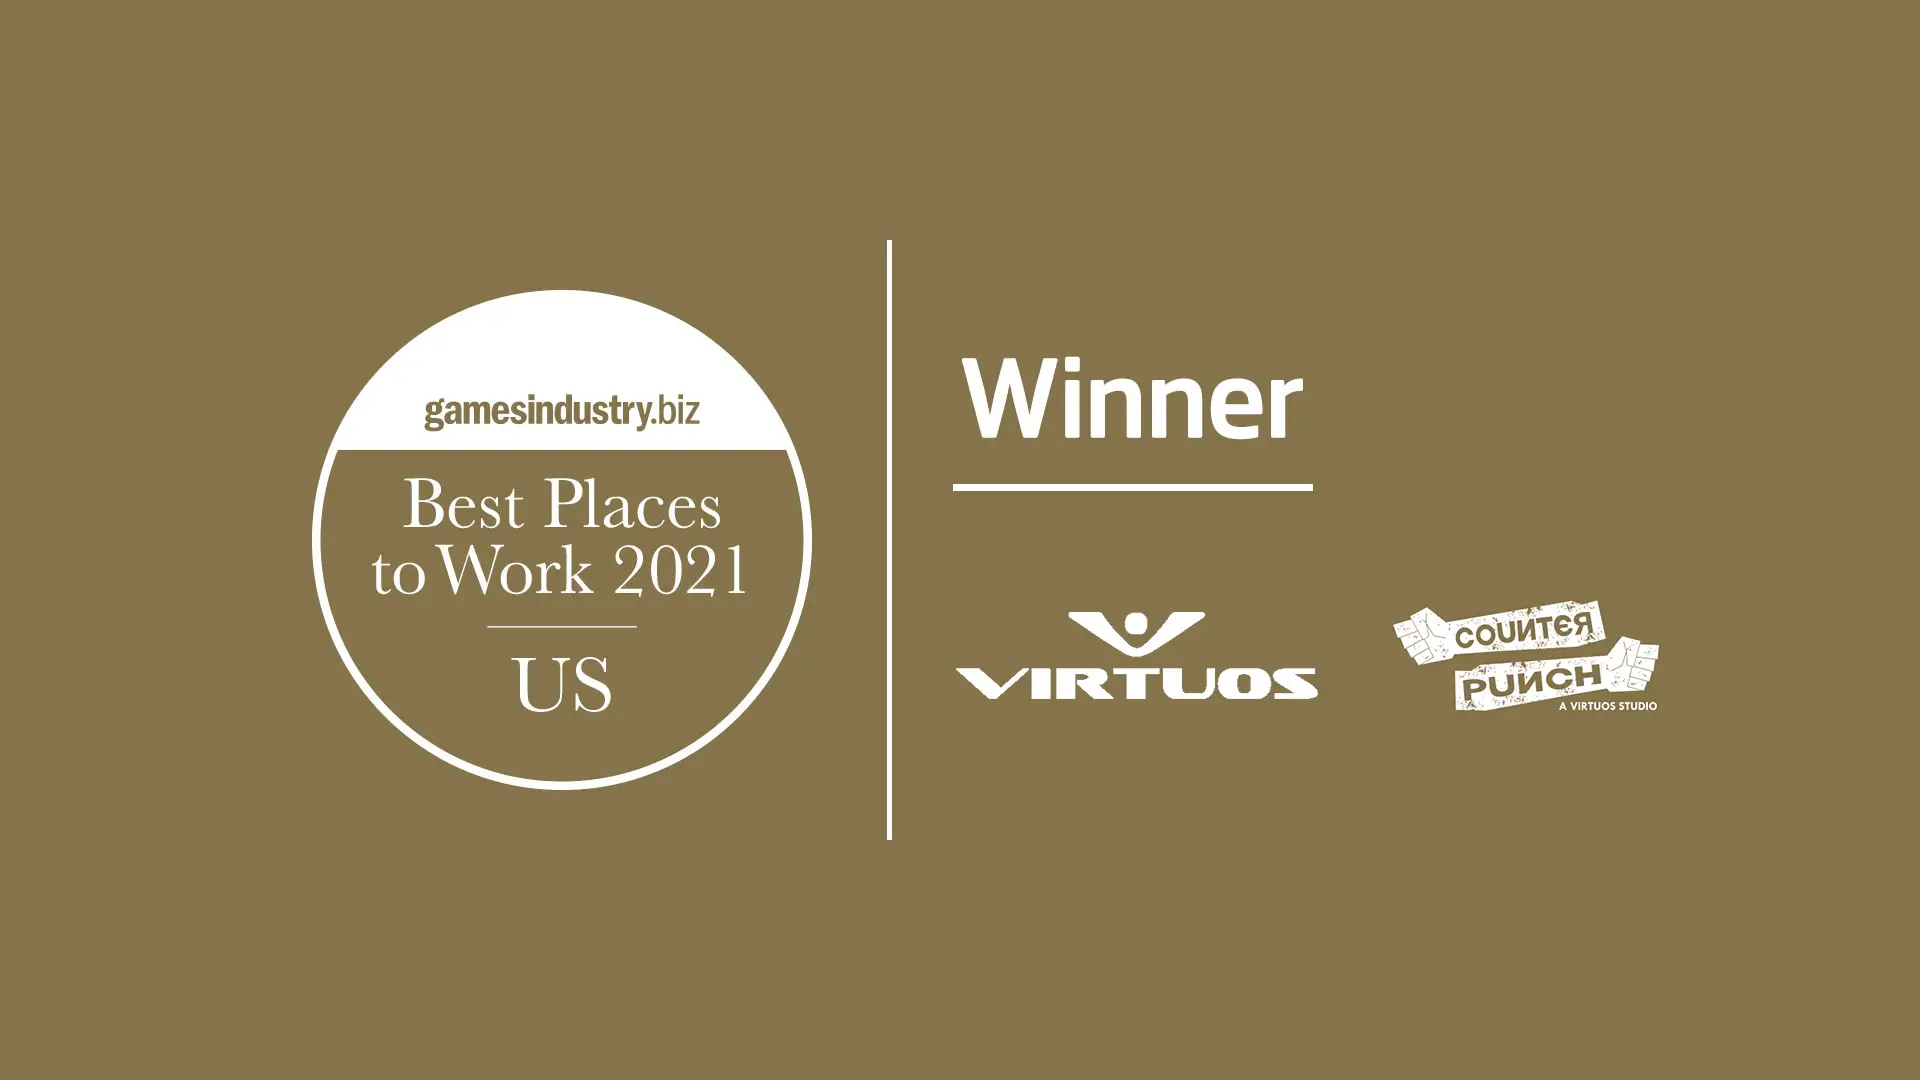 Virtuos and CounterPunch Named in GamesIndustry.biz US Best Places To Work Awards 2021